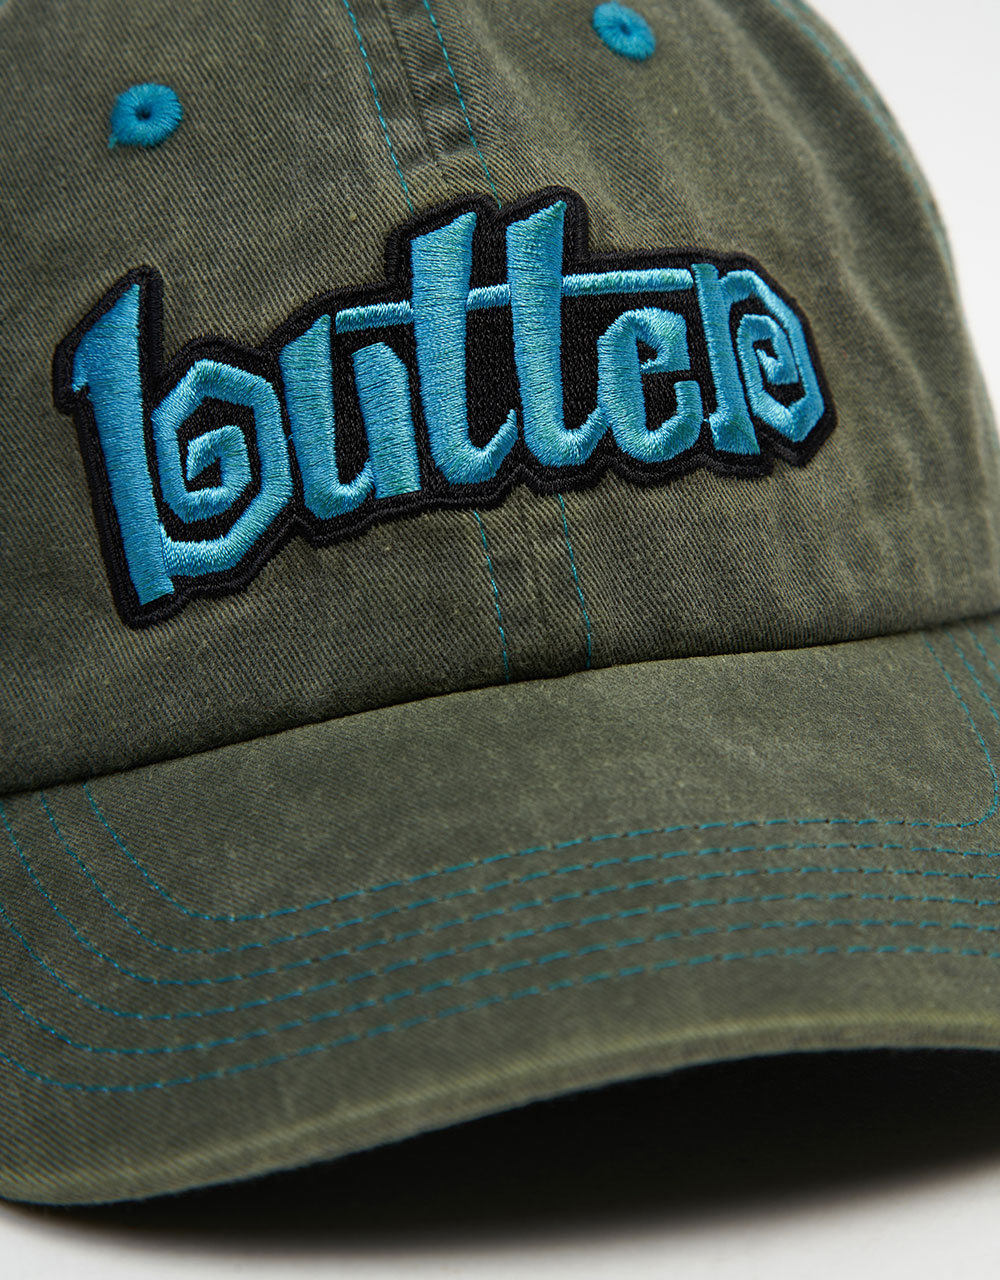 Butter Goods Swirl 6 Panel Cap - Washed Foliage